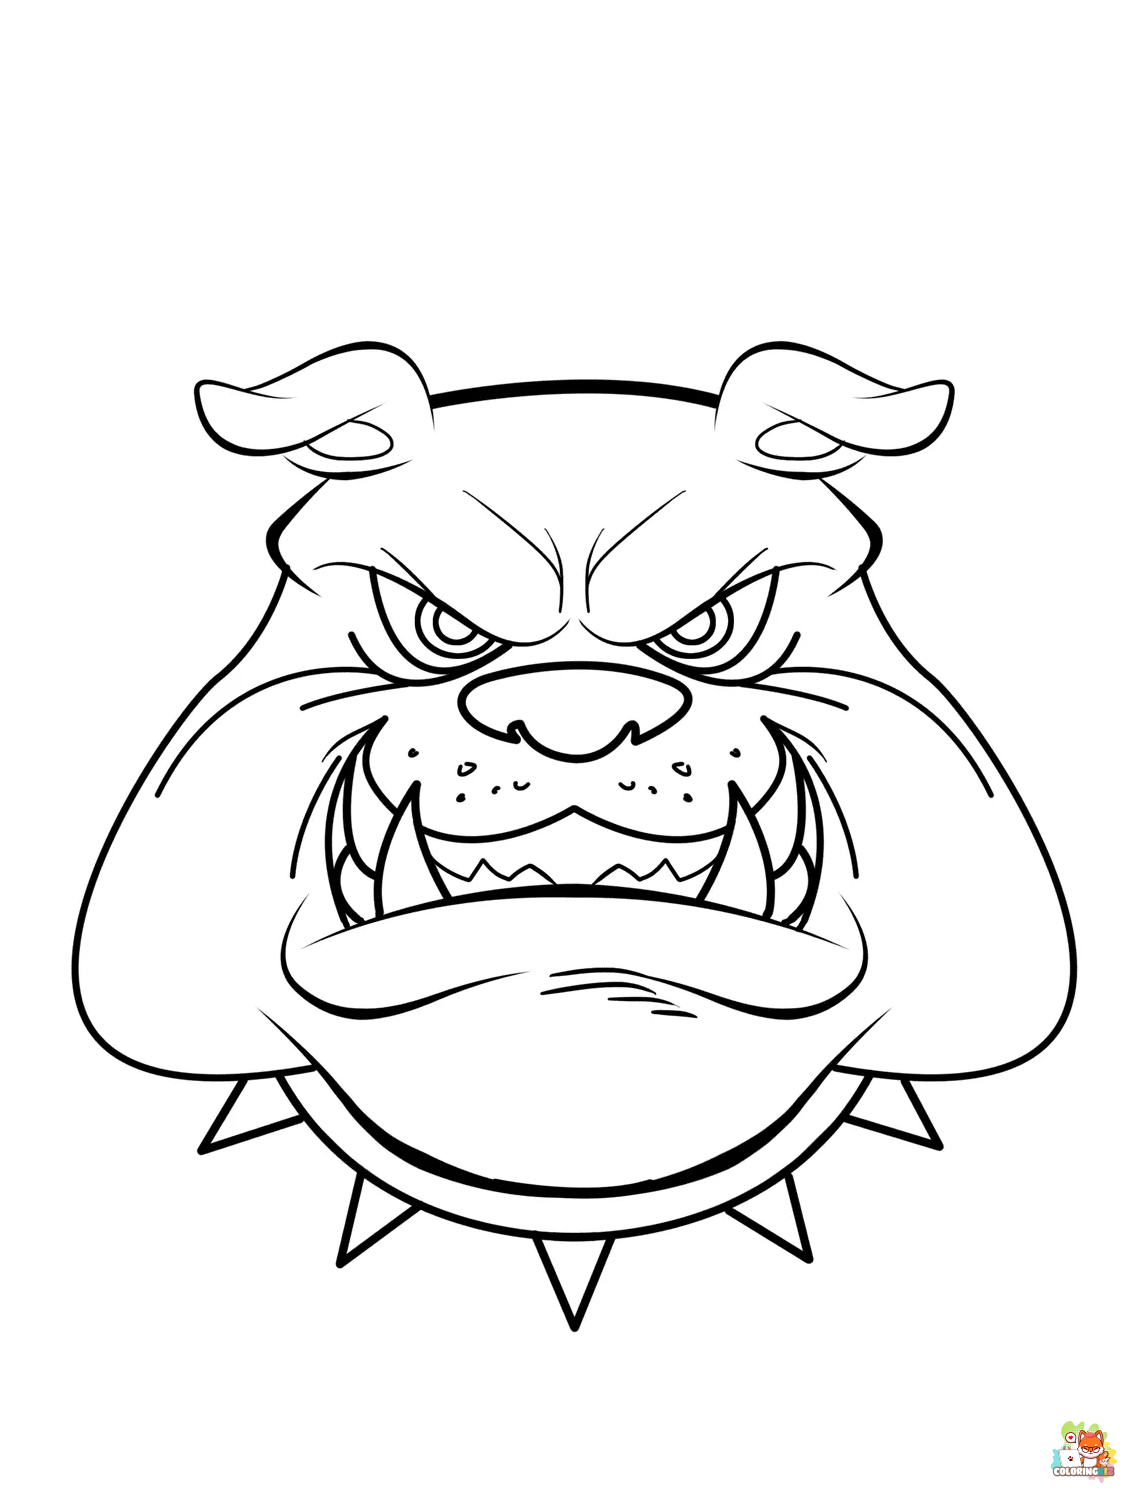 Scary Pitbull Coloring Pages 3